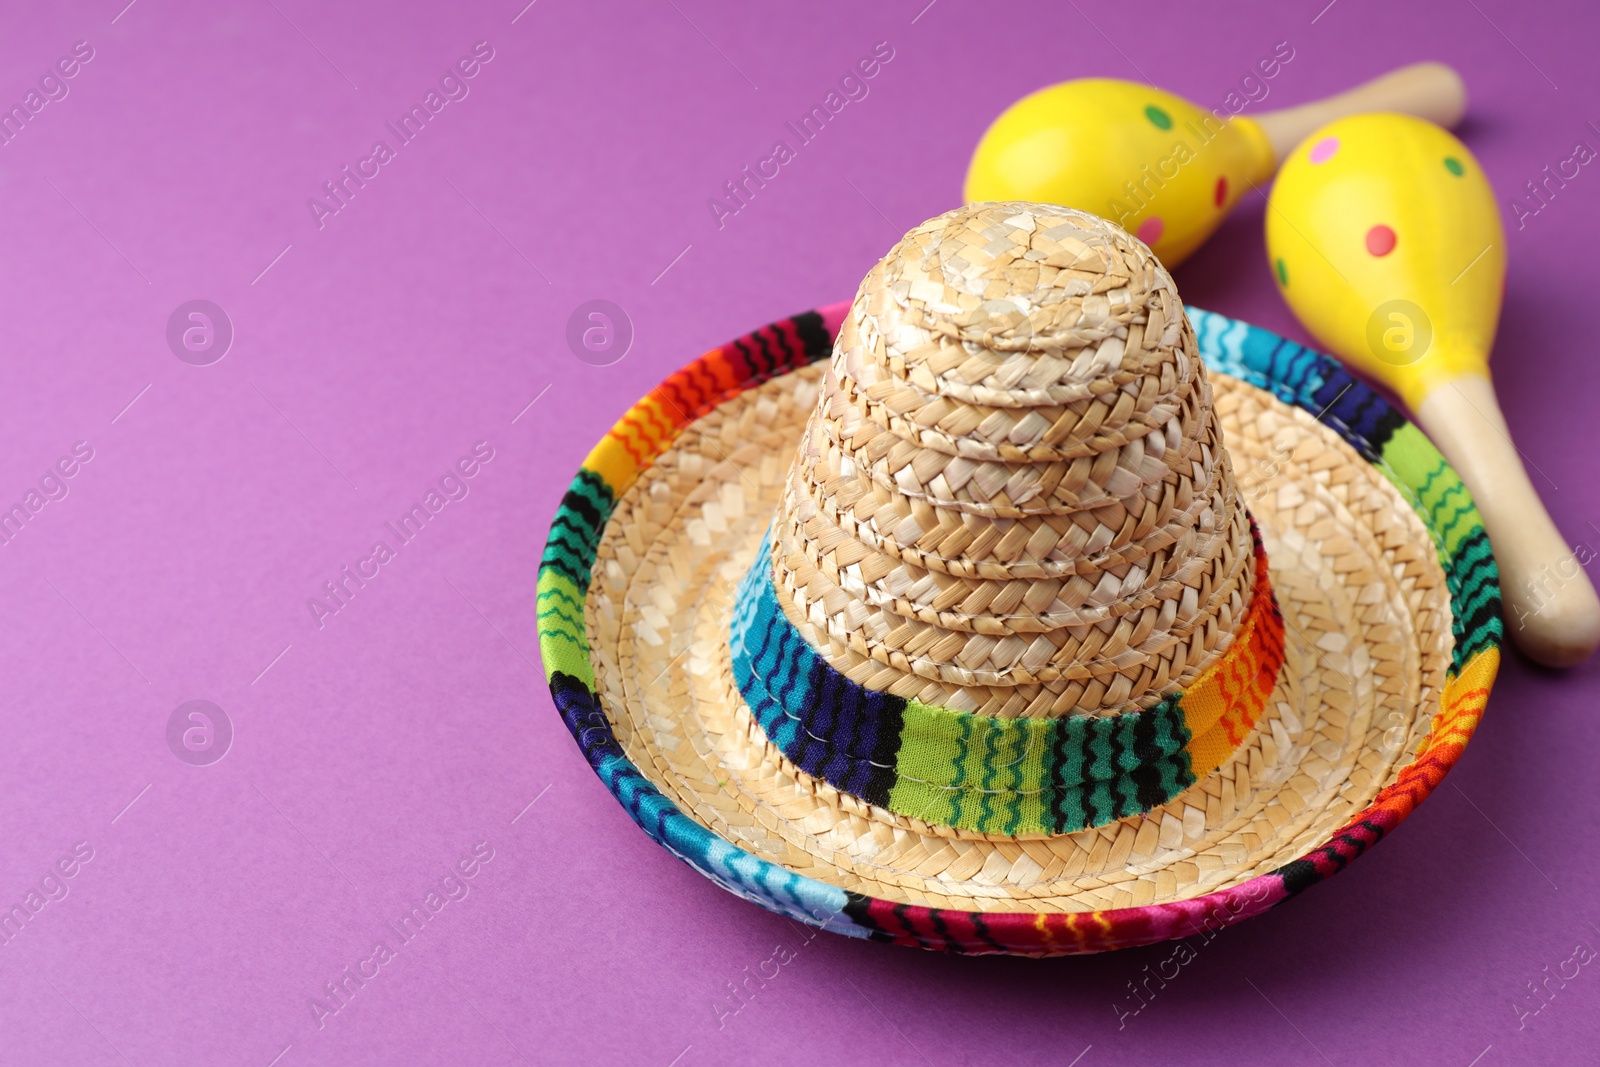 Photo of Mexican sombrero hat and maracas on purple background. Space for text